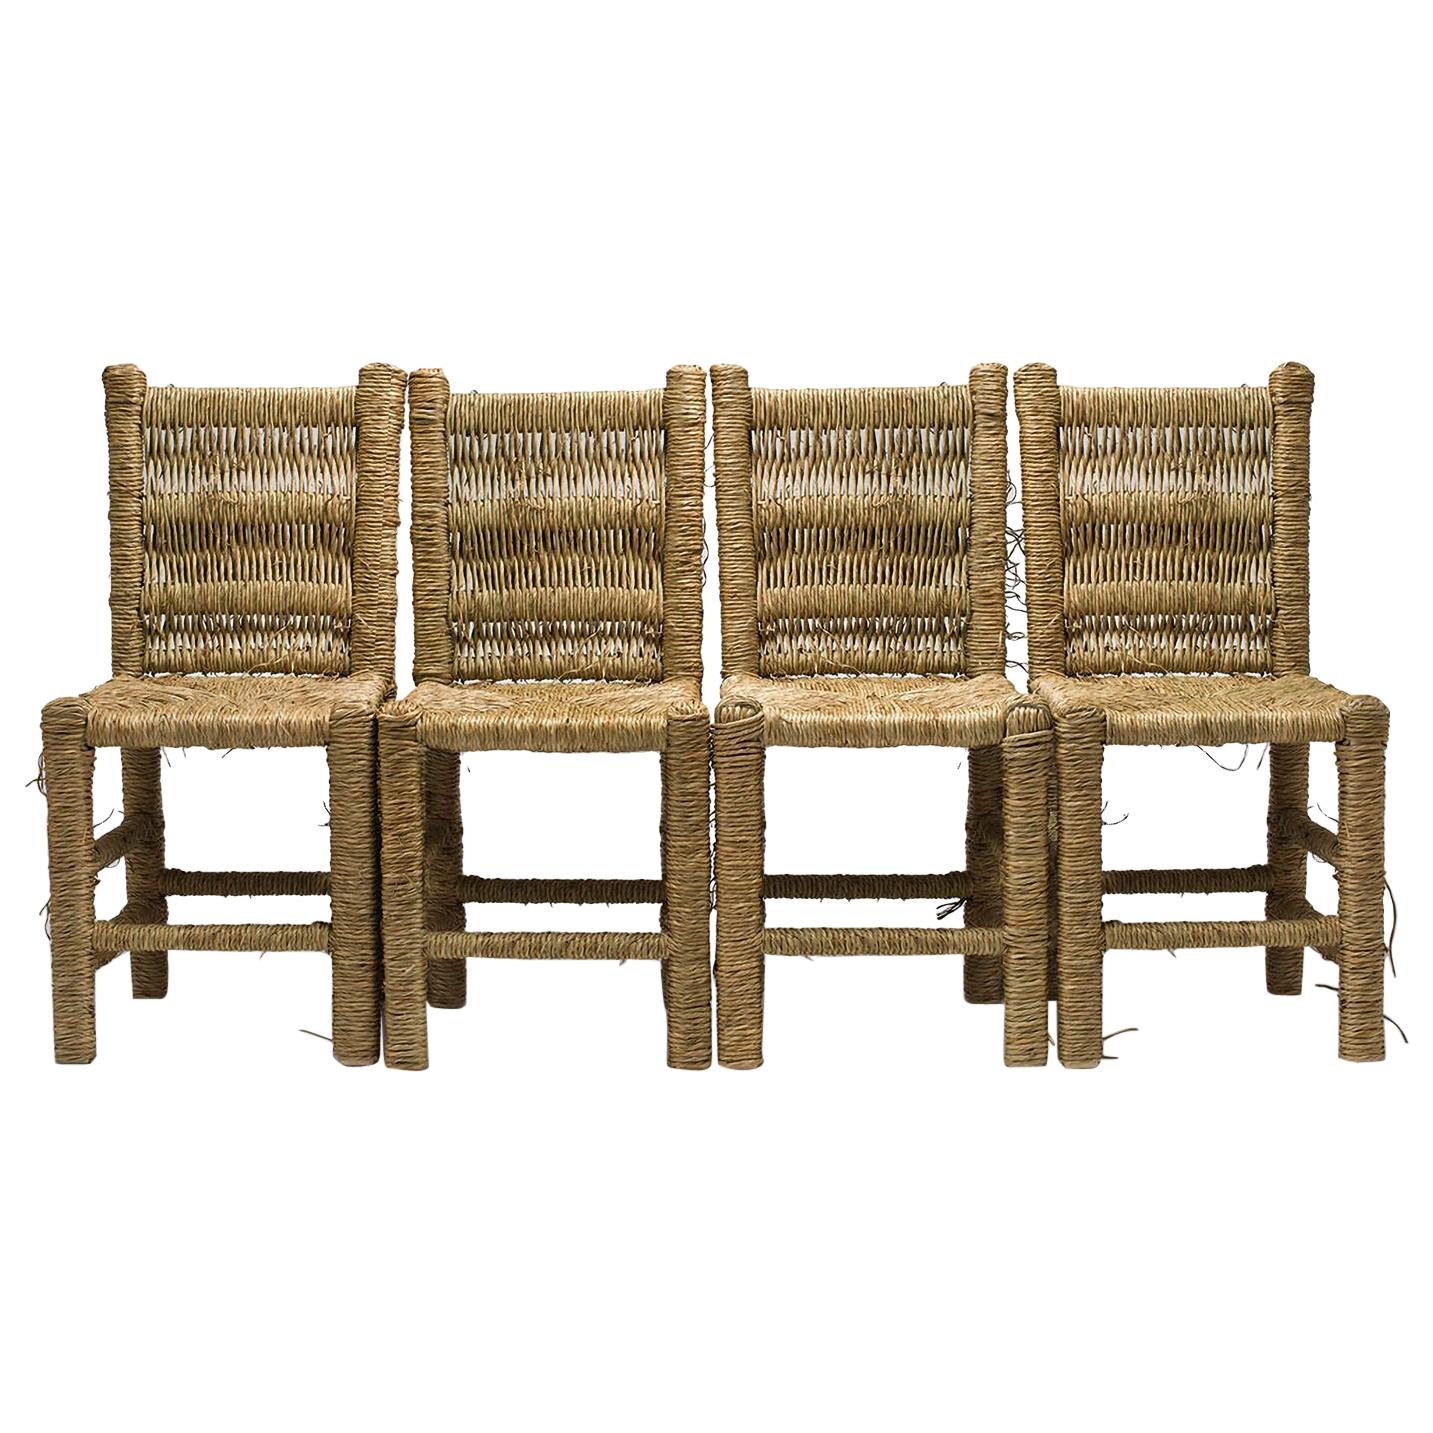 21st Century Vincent IV Set of 4 Chairs by Atelier Biagetti Caned Natural Wood